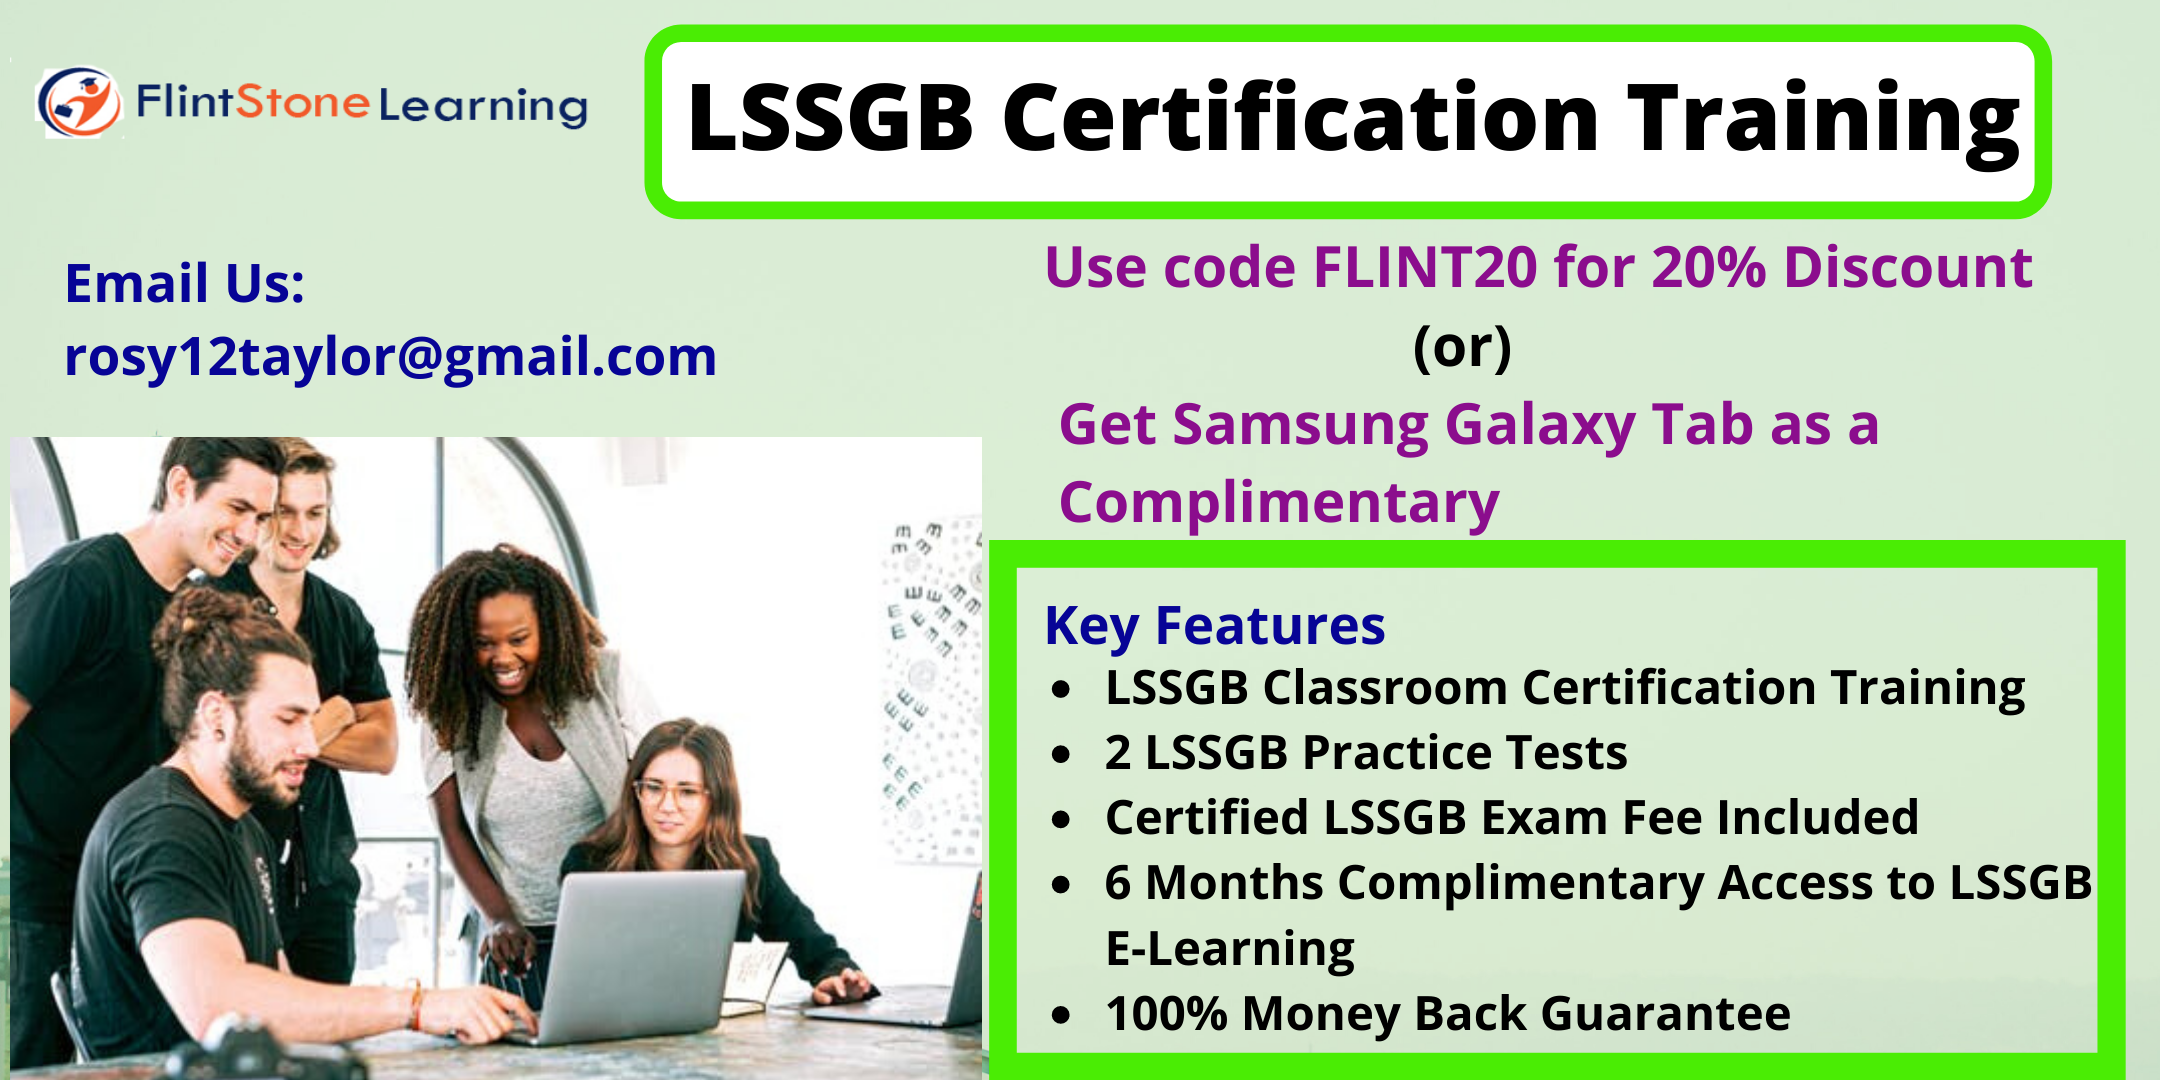 LSSGB Certification Training Course in AnnArbor, MI